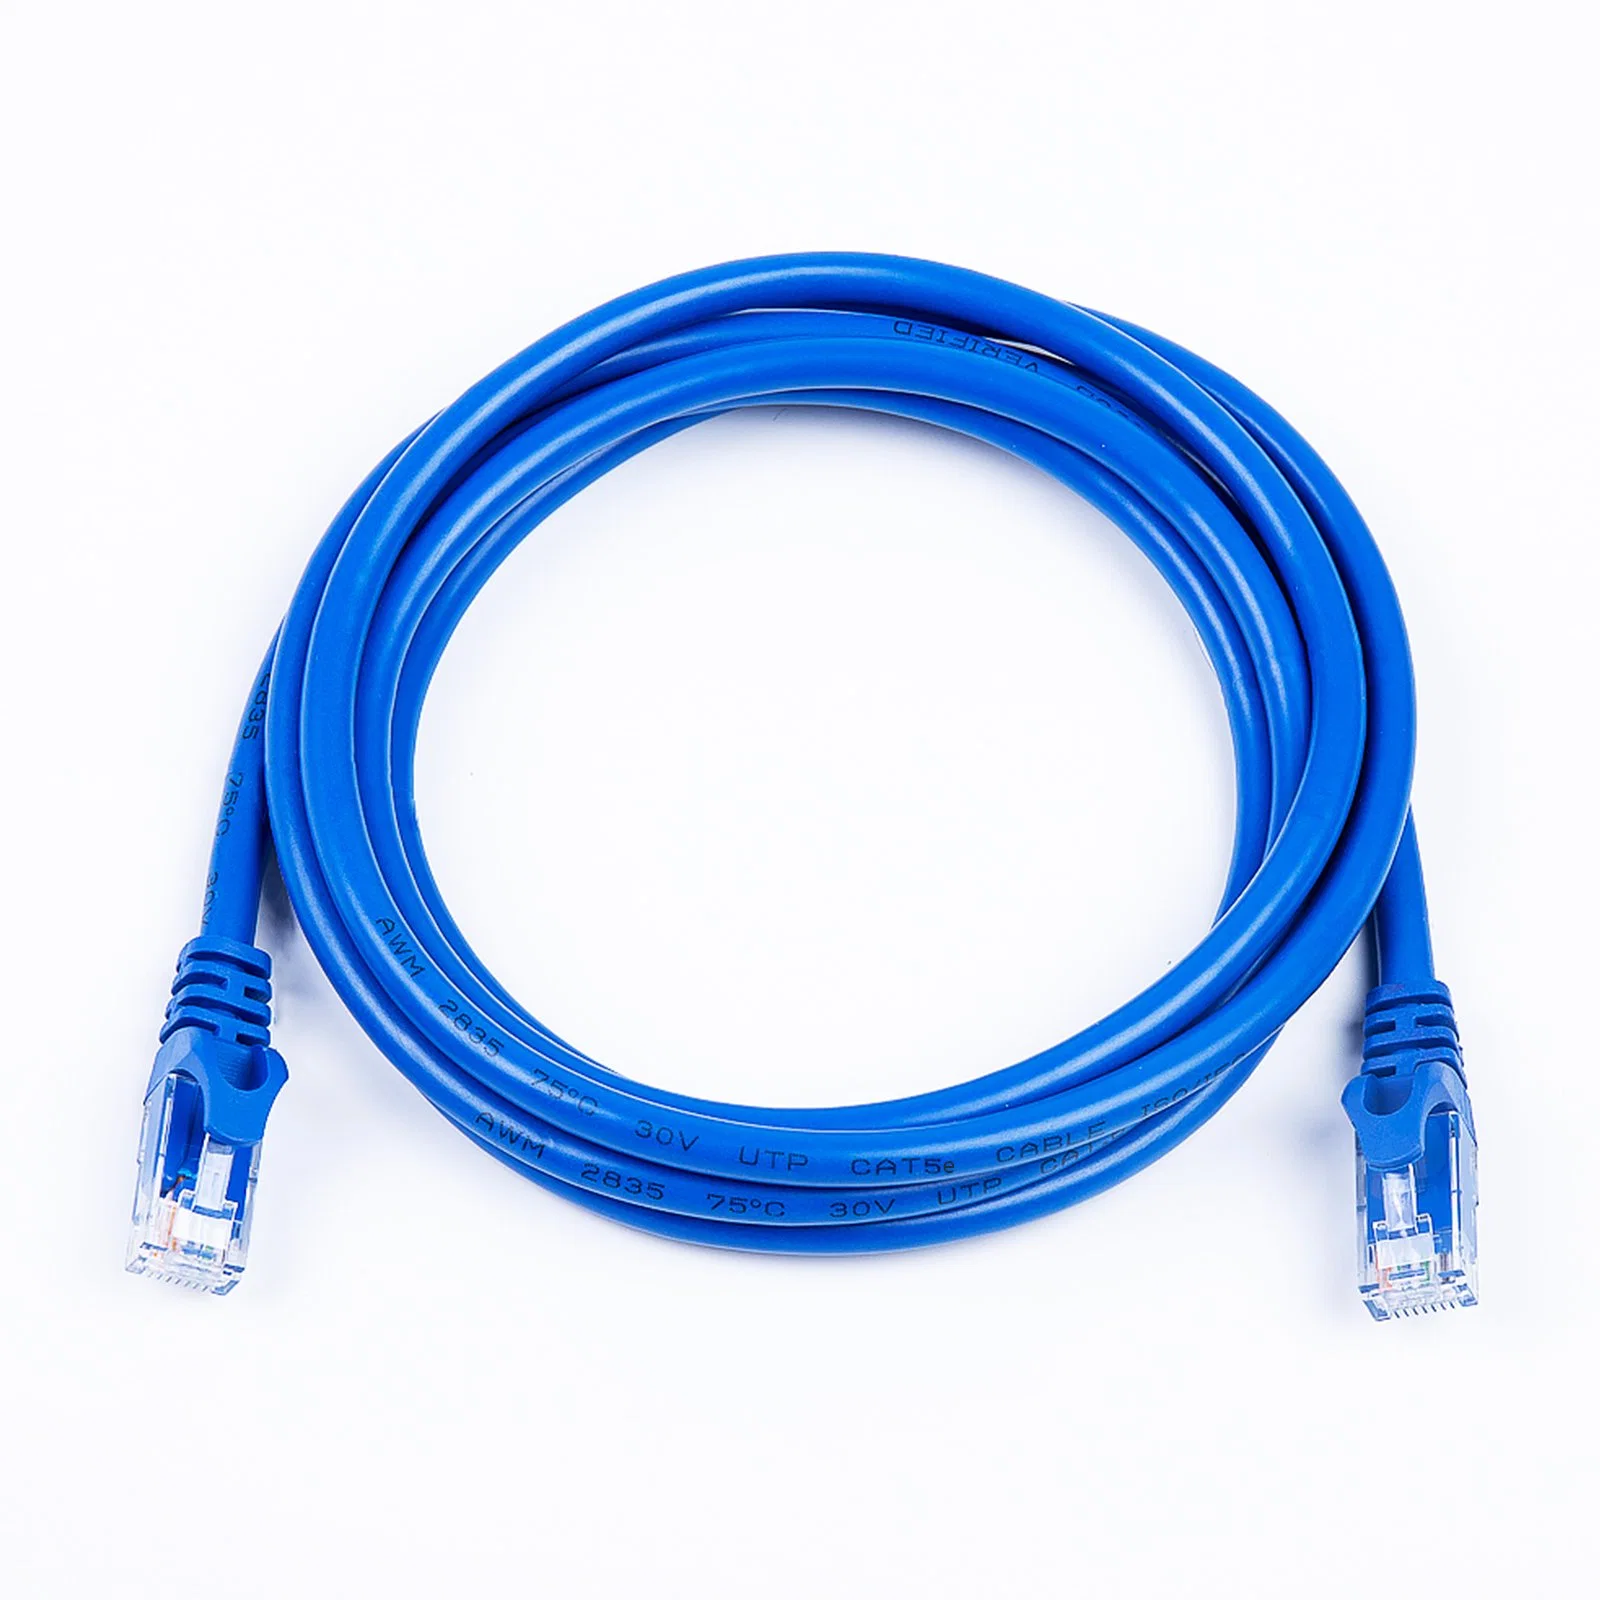 Best Quality Manufacturer Wholesale/Supplier Communication Copper Pure 24AWG Twisted 4 Pair Utpsftp Patch Cord Cat5ecat6 Network LAN Cable